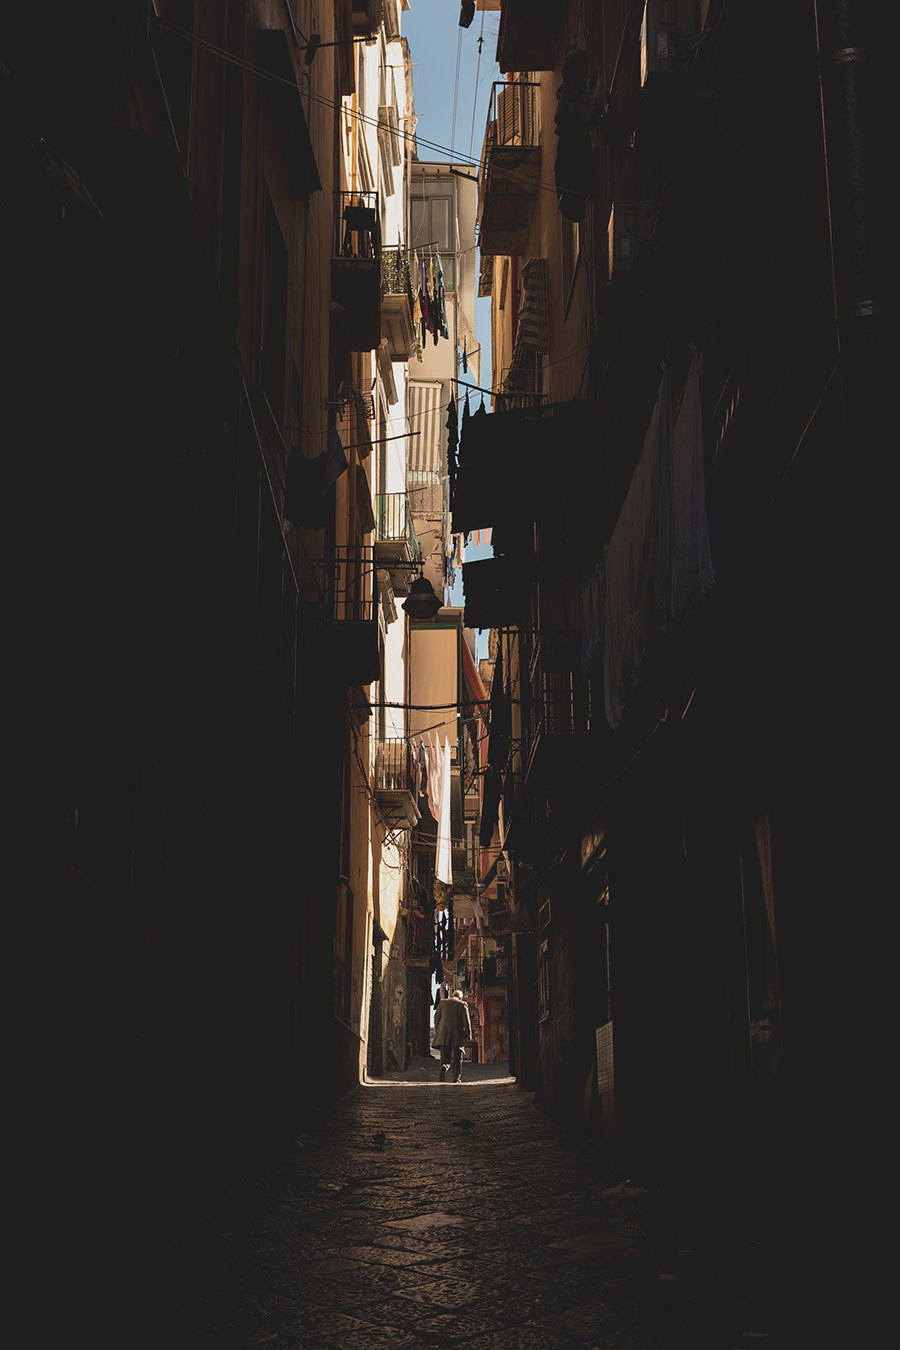 An Alley of Darkness